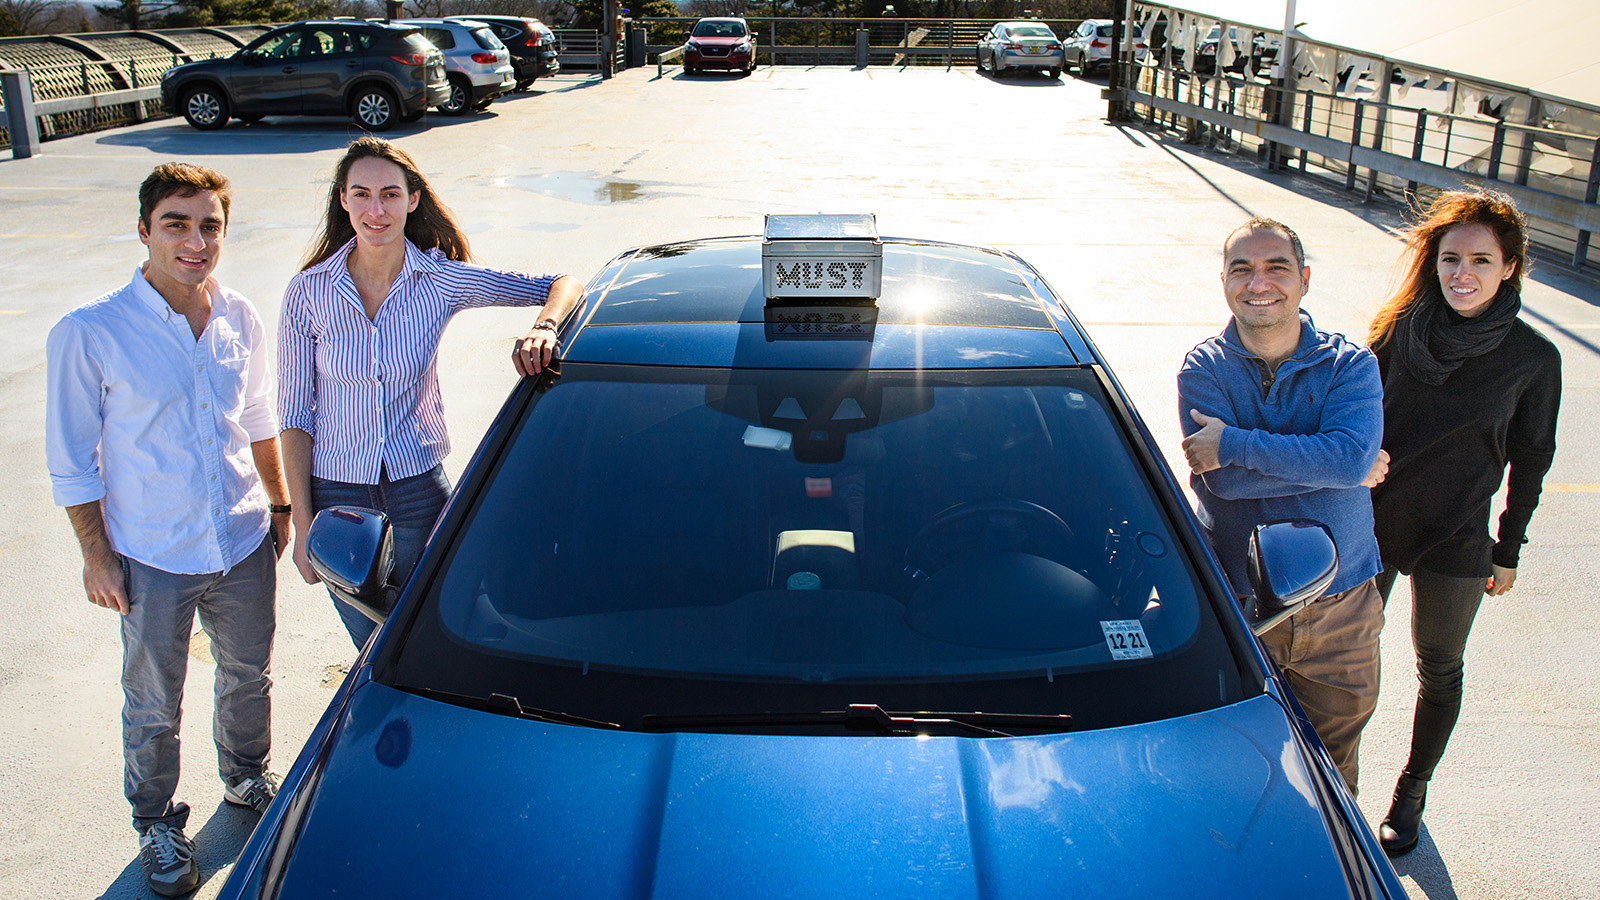 Four researchers stand next to a blue car, two people on each side of the car, which has a device on the roof labeled "MUST"